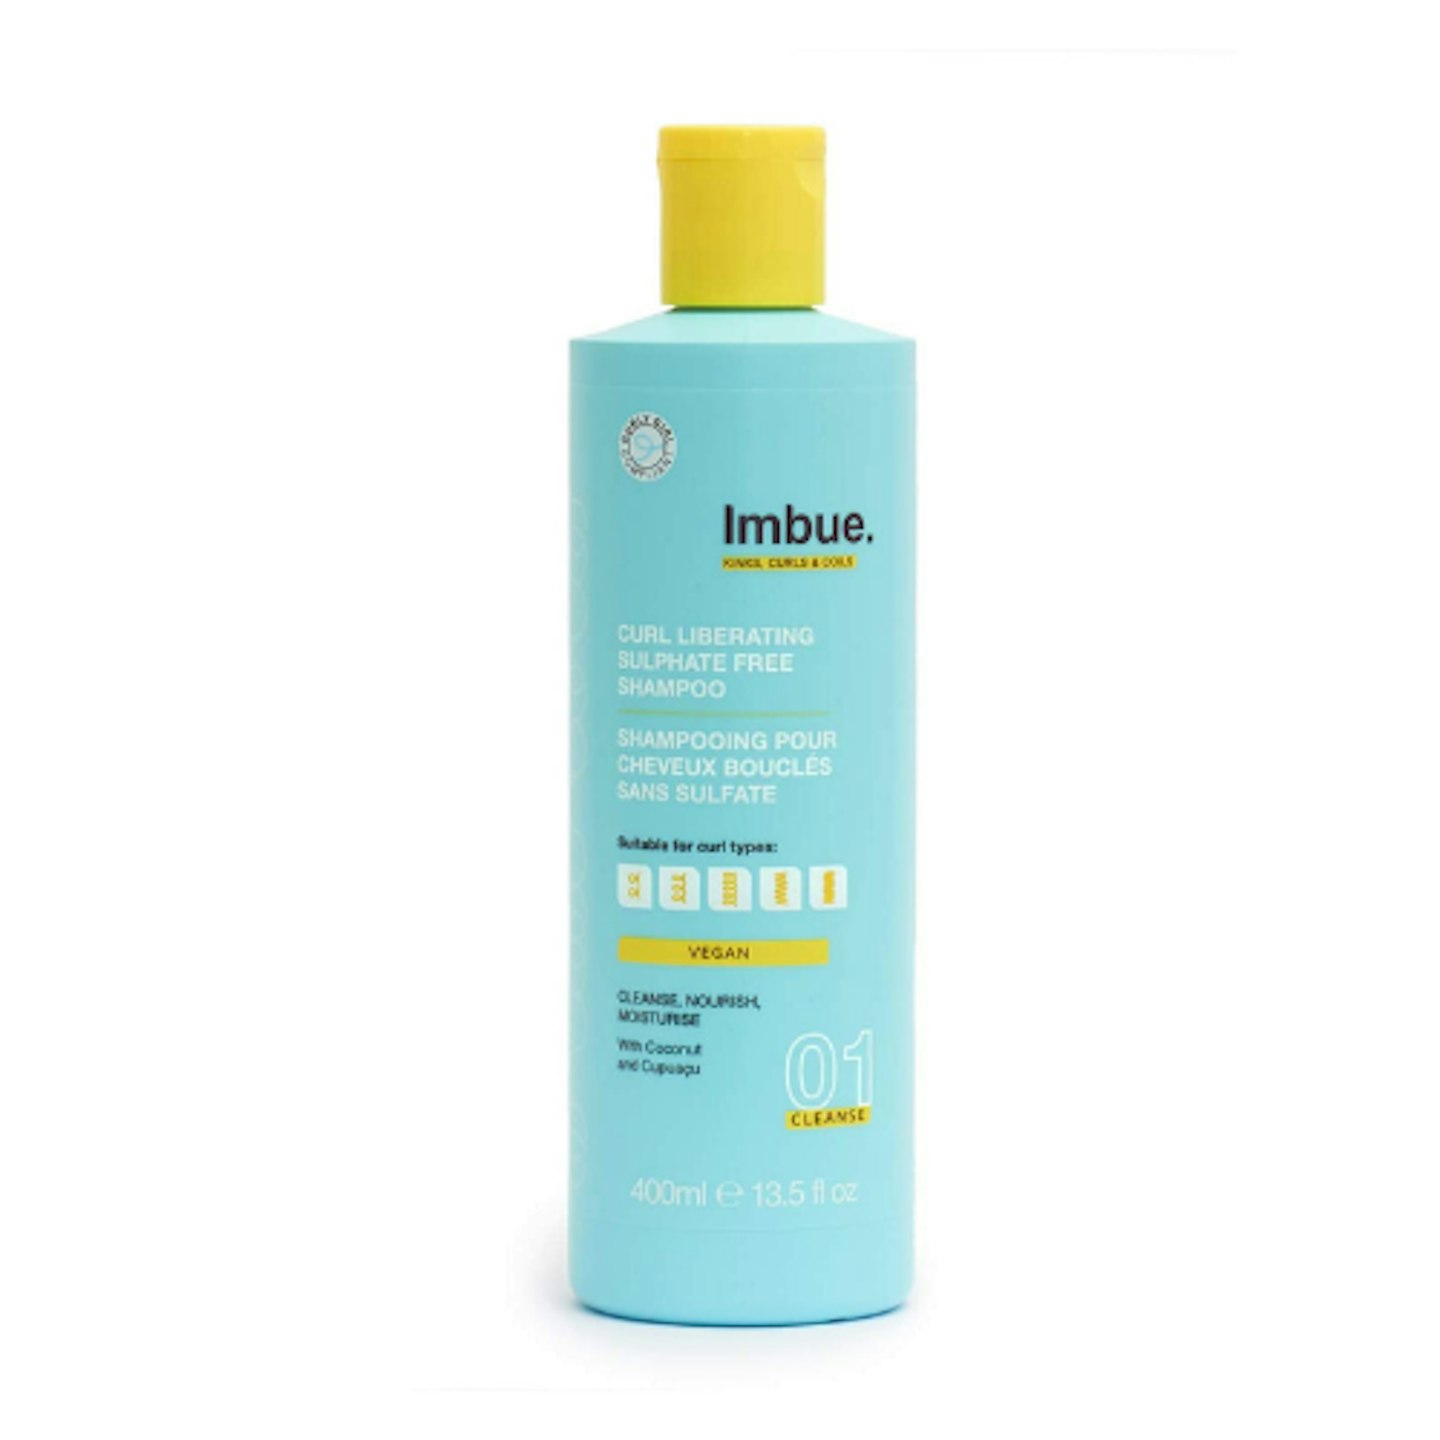 Imbue Curl Liberating Sulphate Free Shampoo on white background